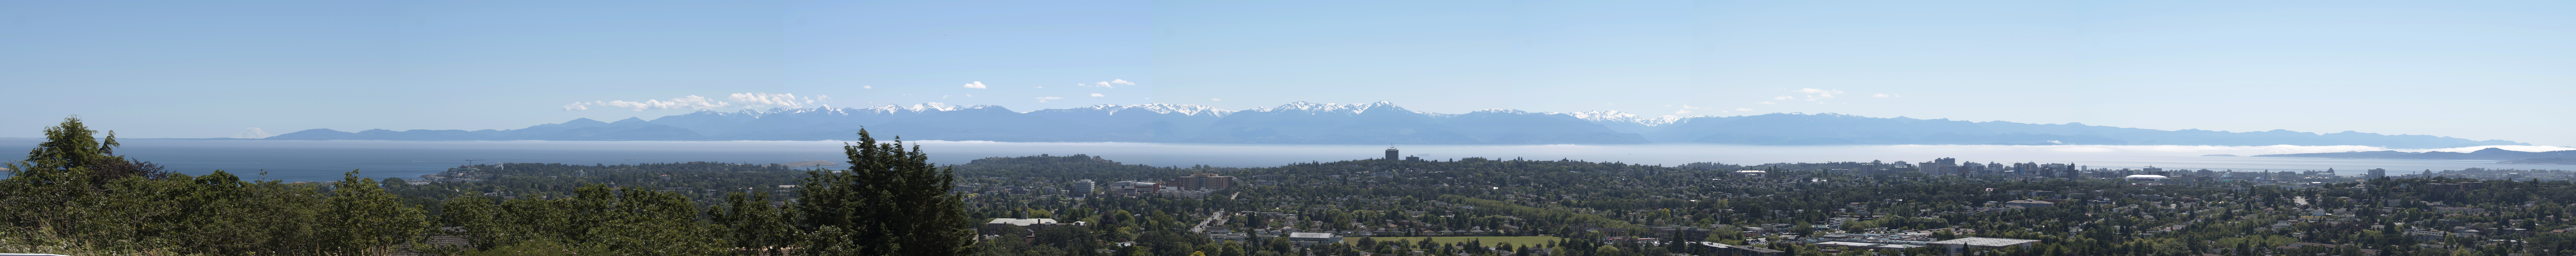 View of the Olympic Mountains in
Washington State, USA, seen from Victoria BC including Mt. Ranier.